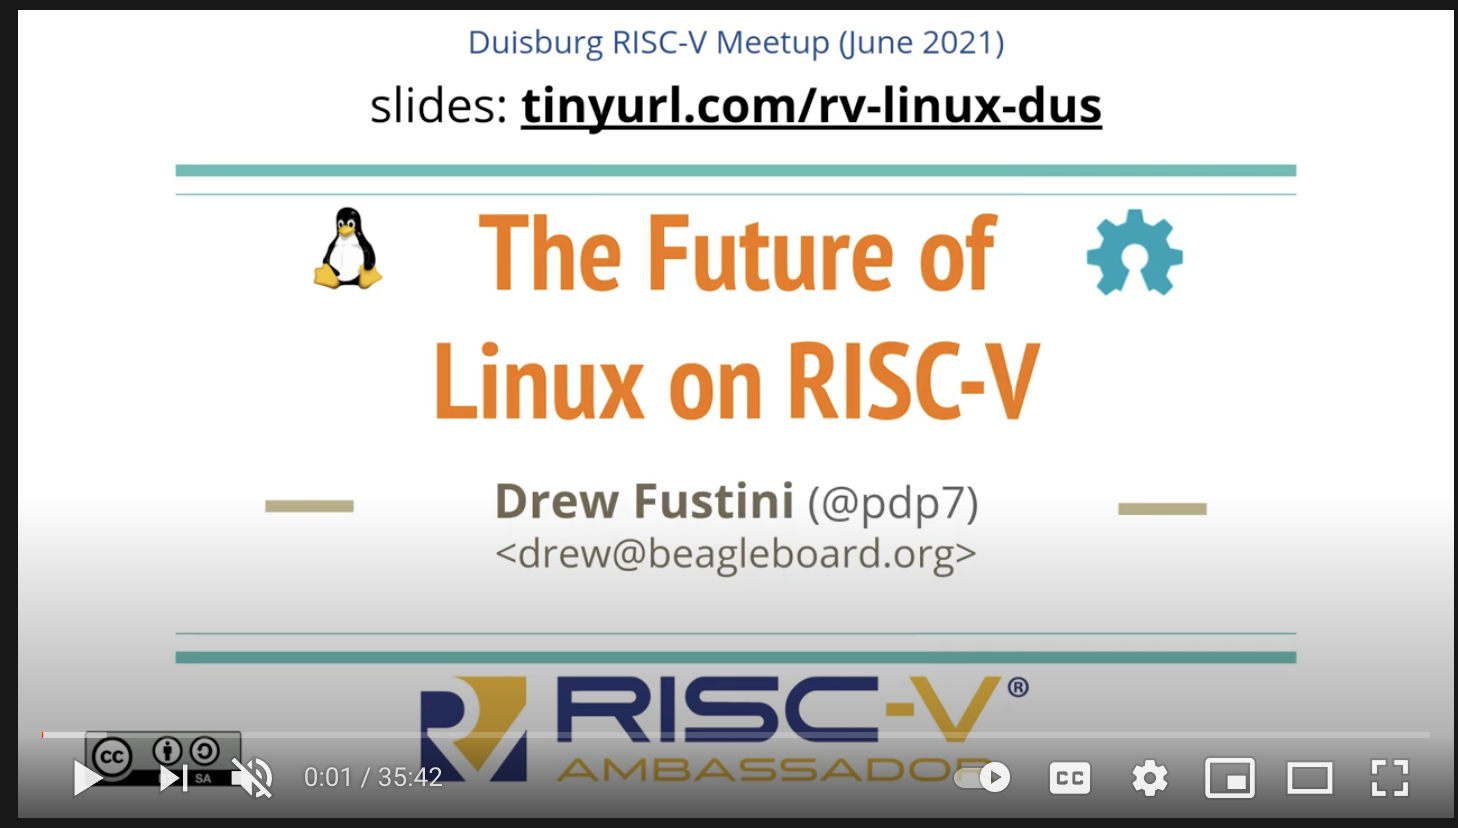 Video: The Future of Linux on RISC-V